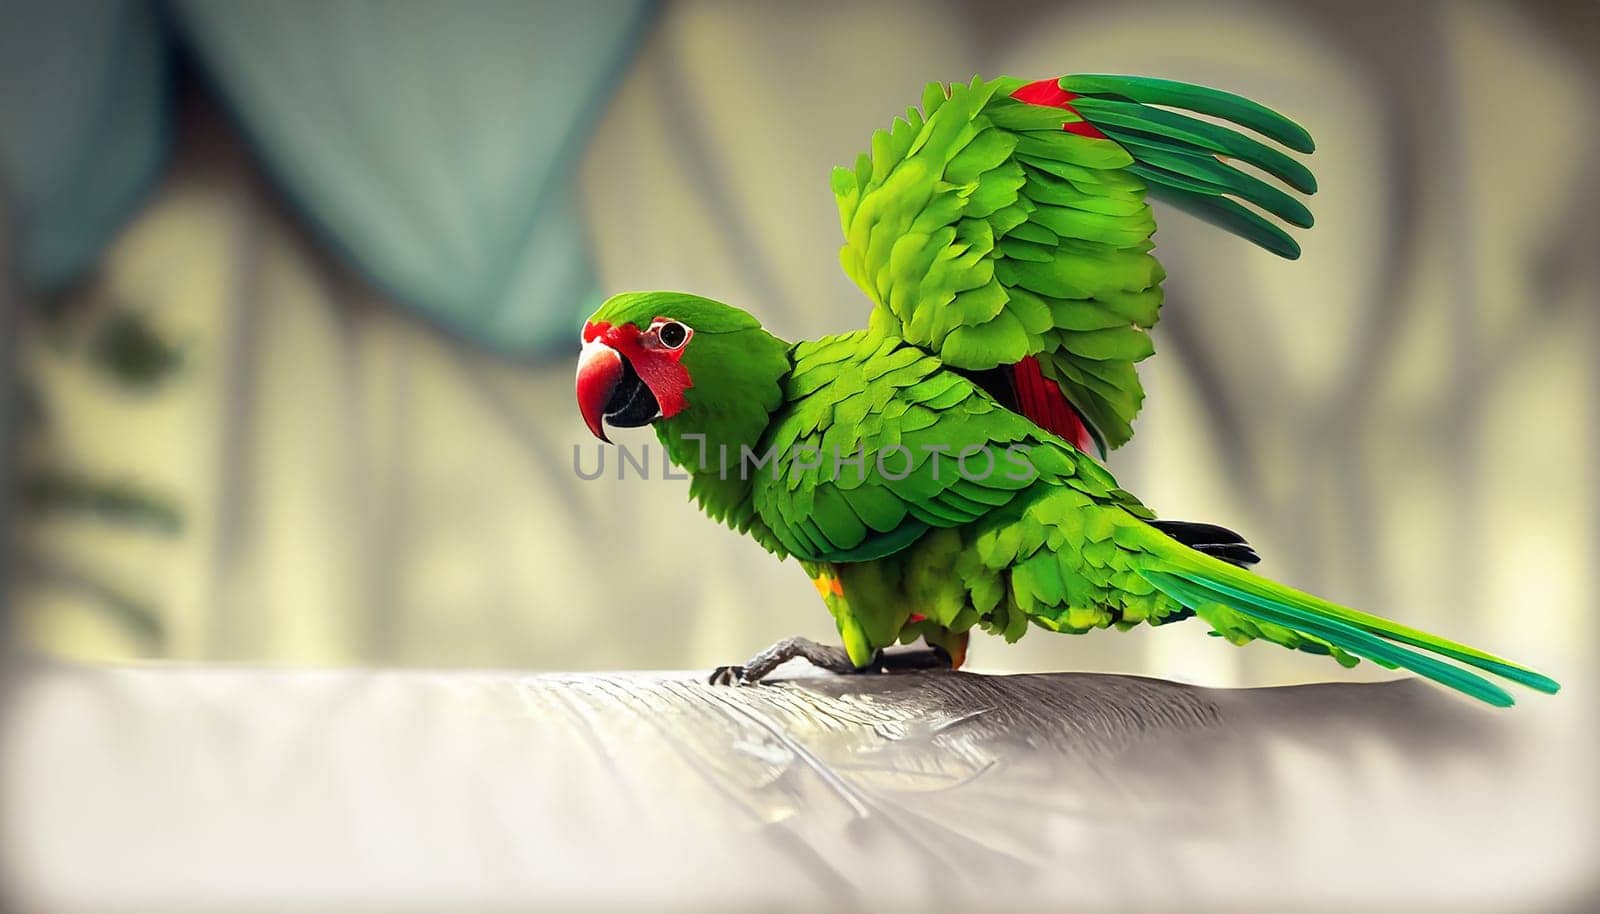 green parrot. green parrot photo .parrot in the garden. green parrot and green background camouflage.